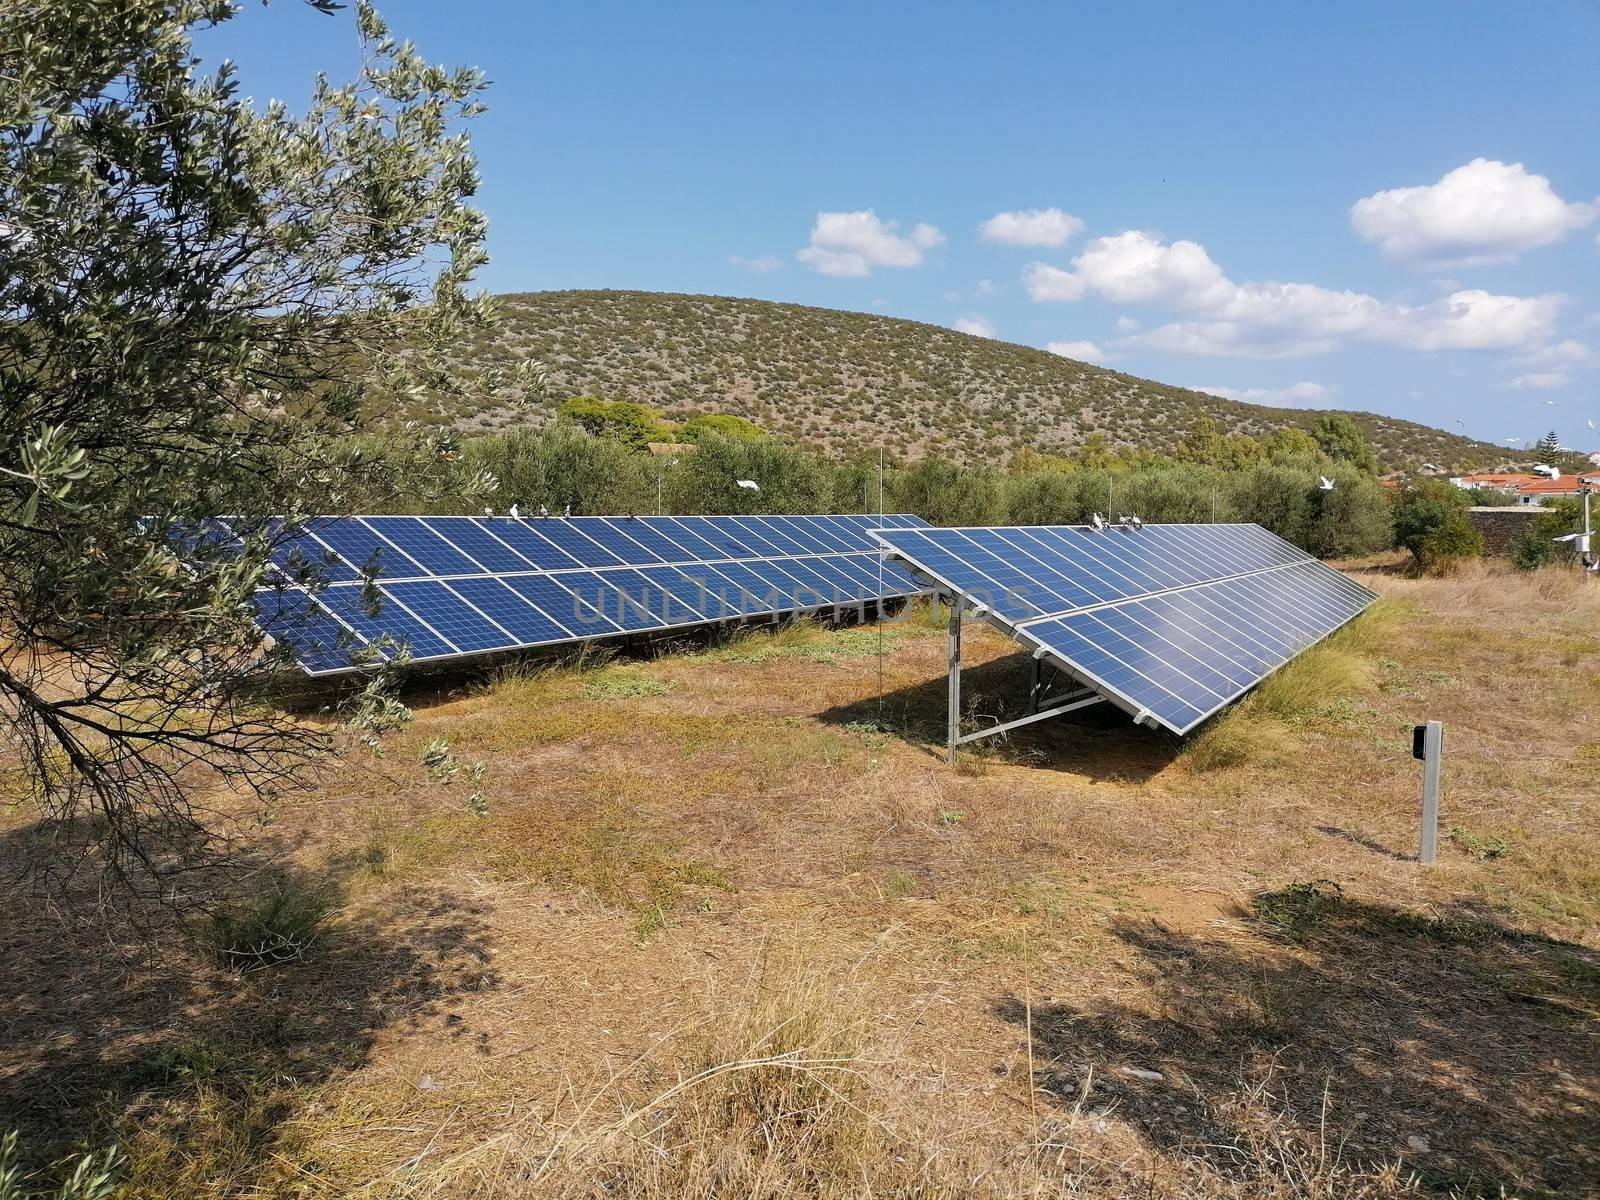 Solar panels photovoltaic in an olive grove in greece